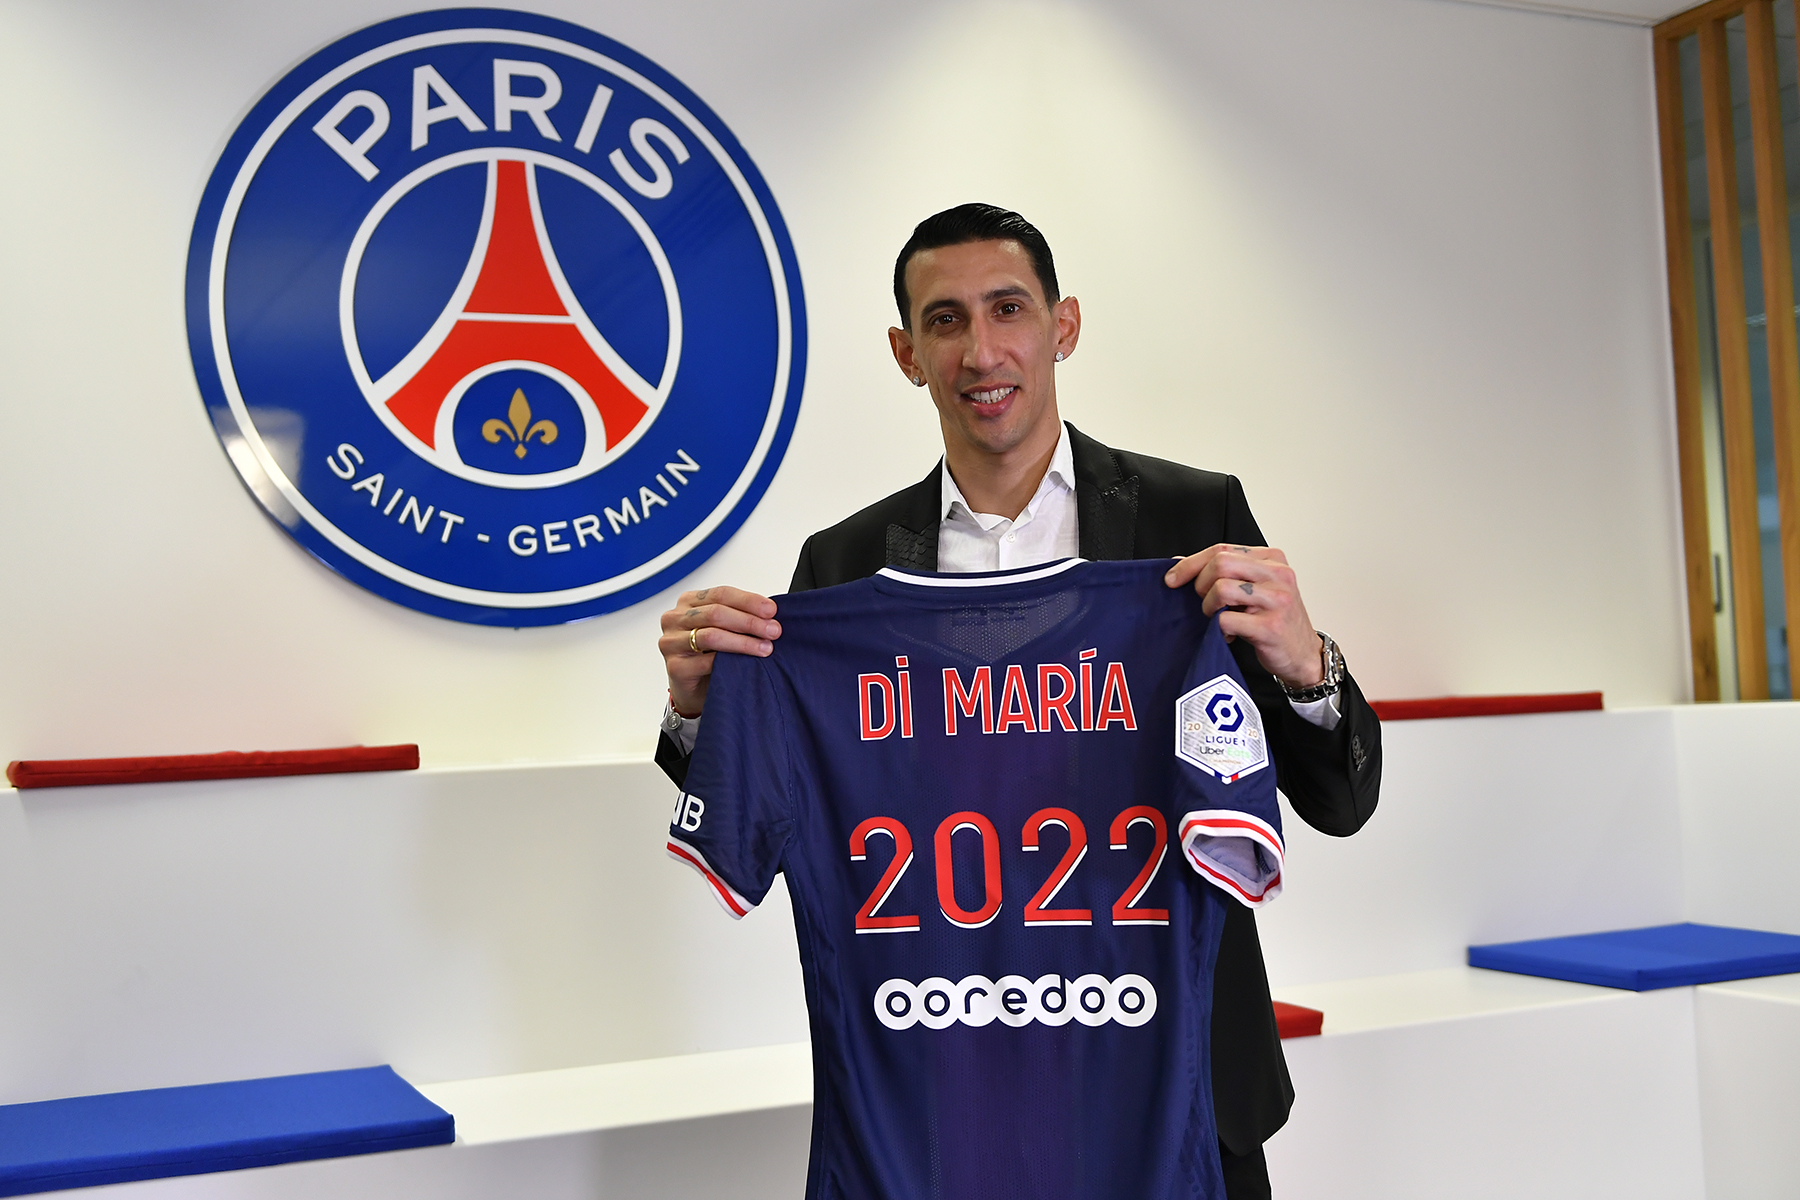 Psg Squad 2022  squad  psg  The season cancelled with some games left.